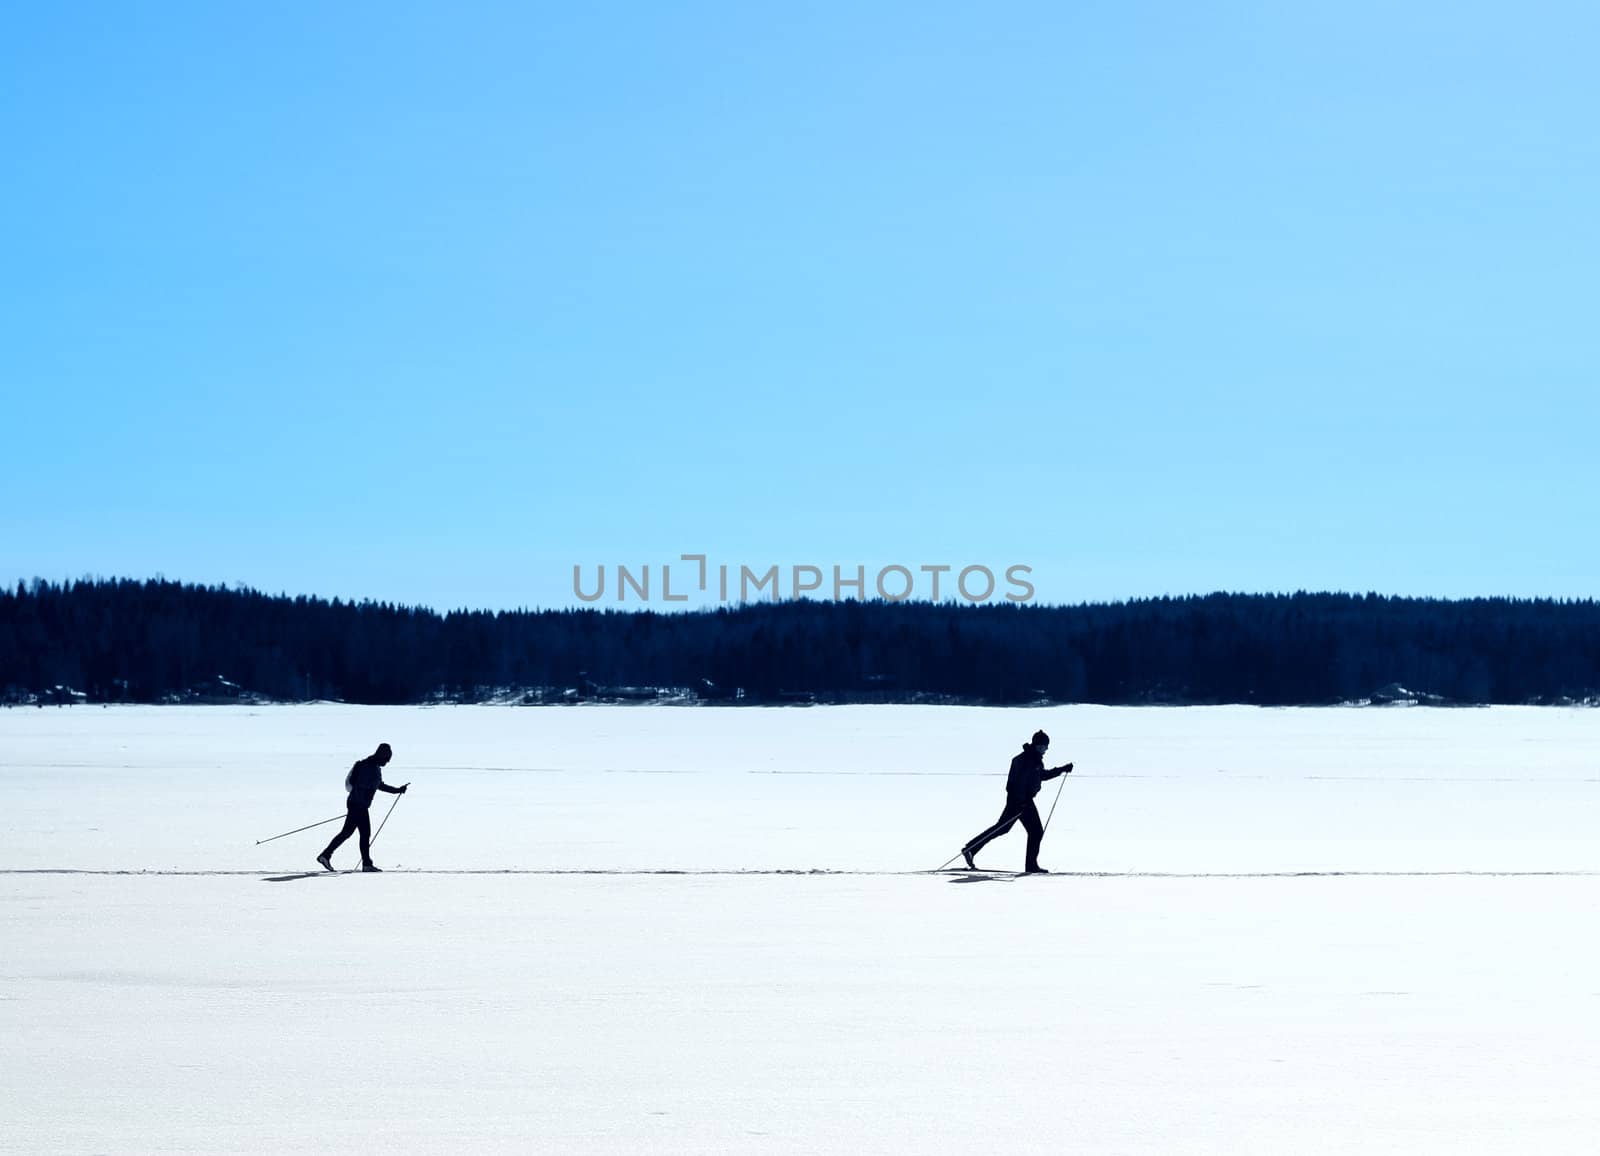 Skiers nordic skiing on frozen lake winter trail